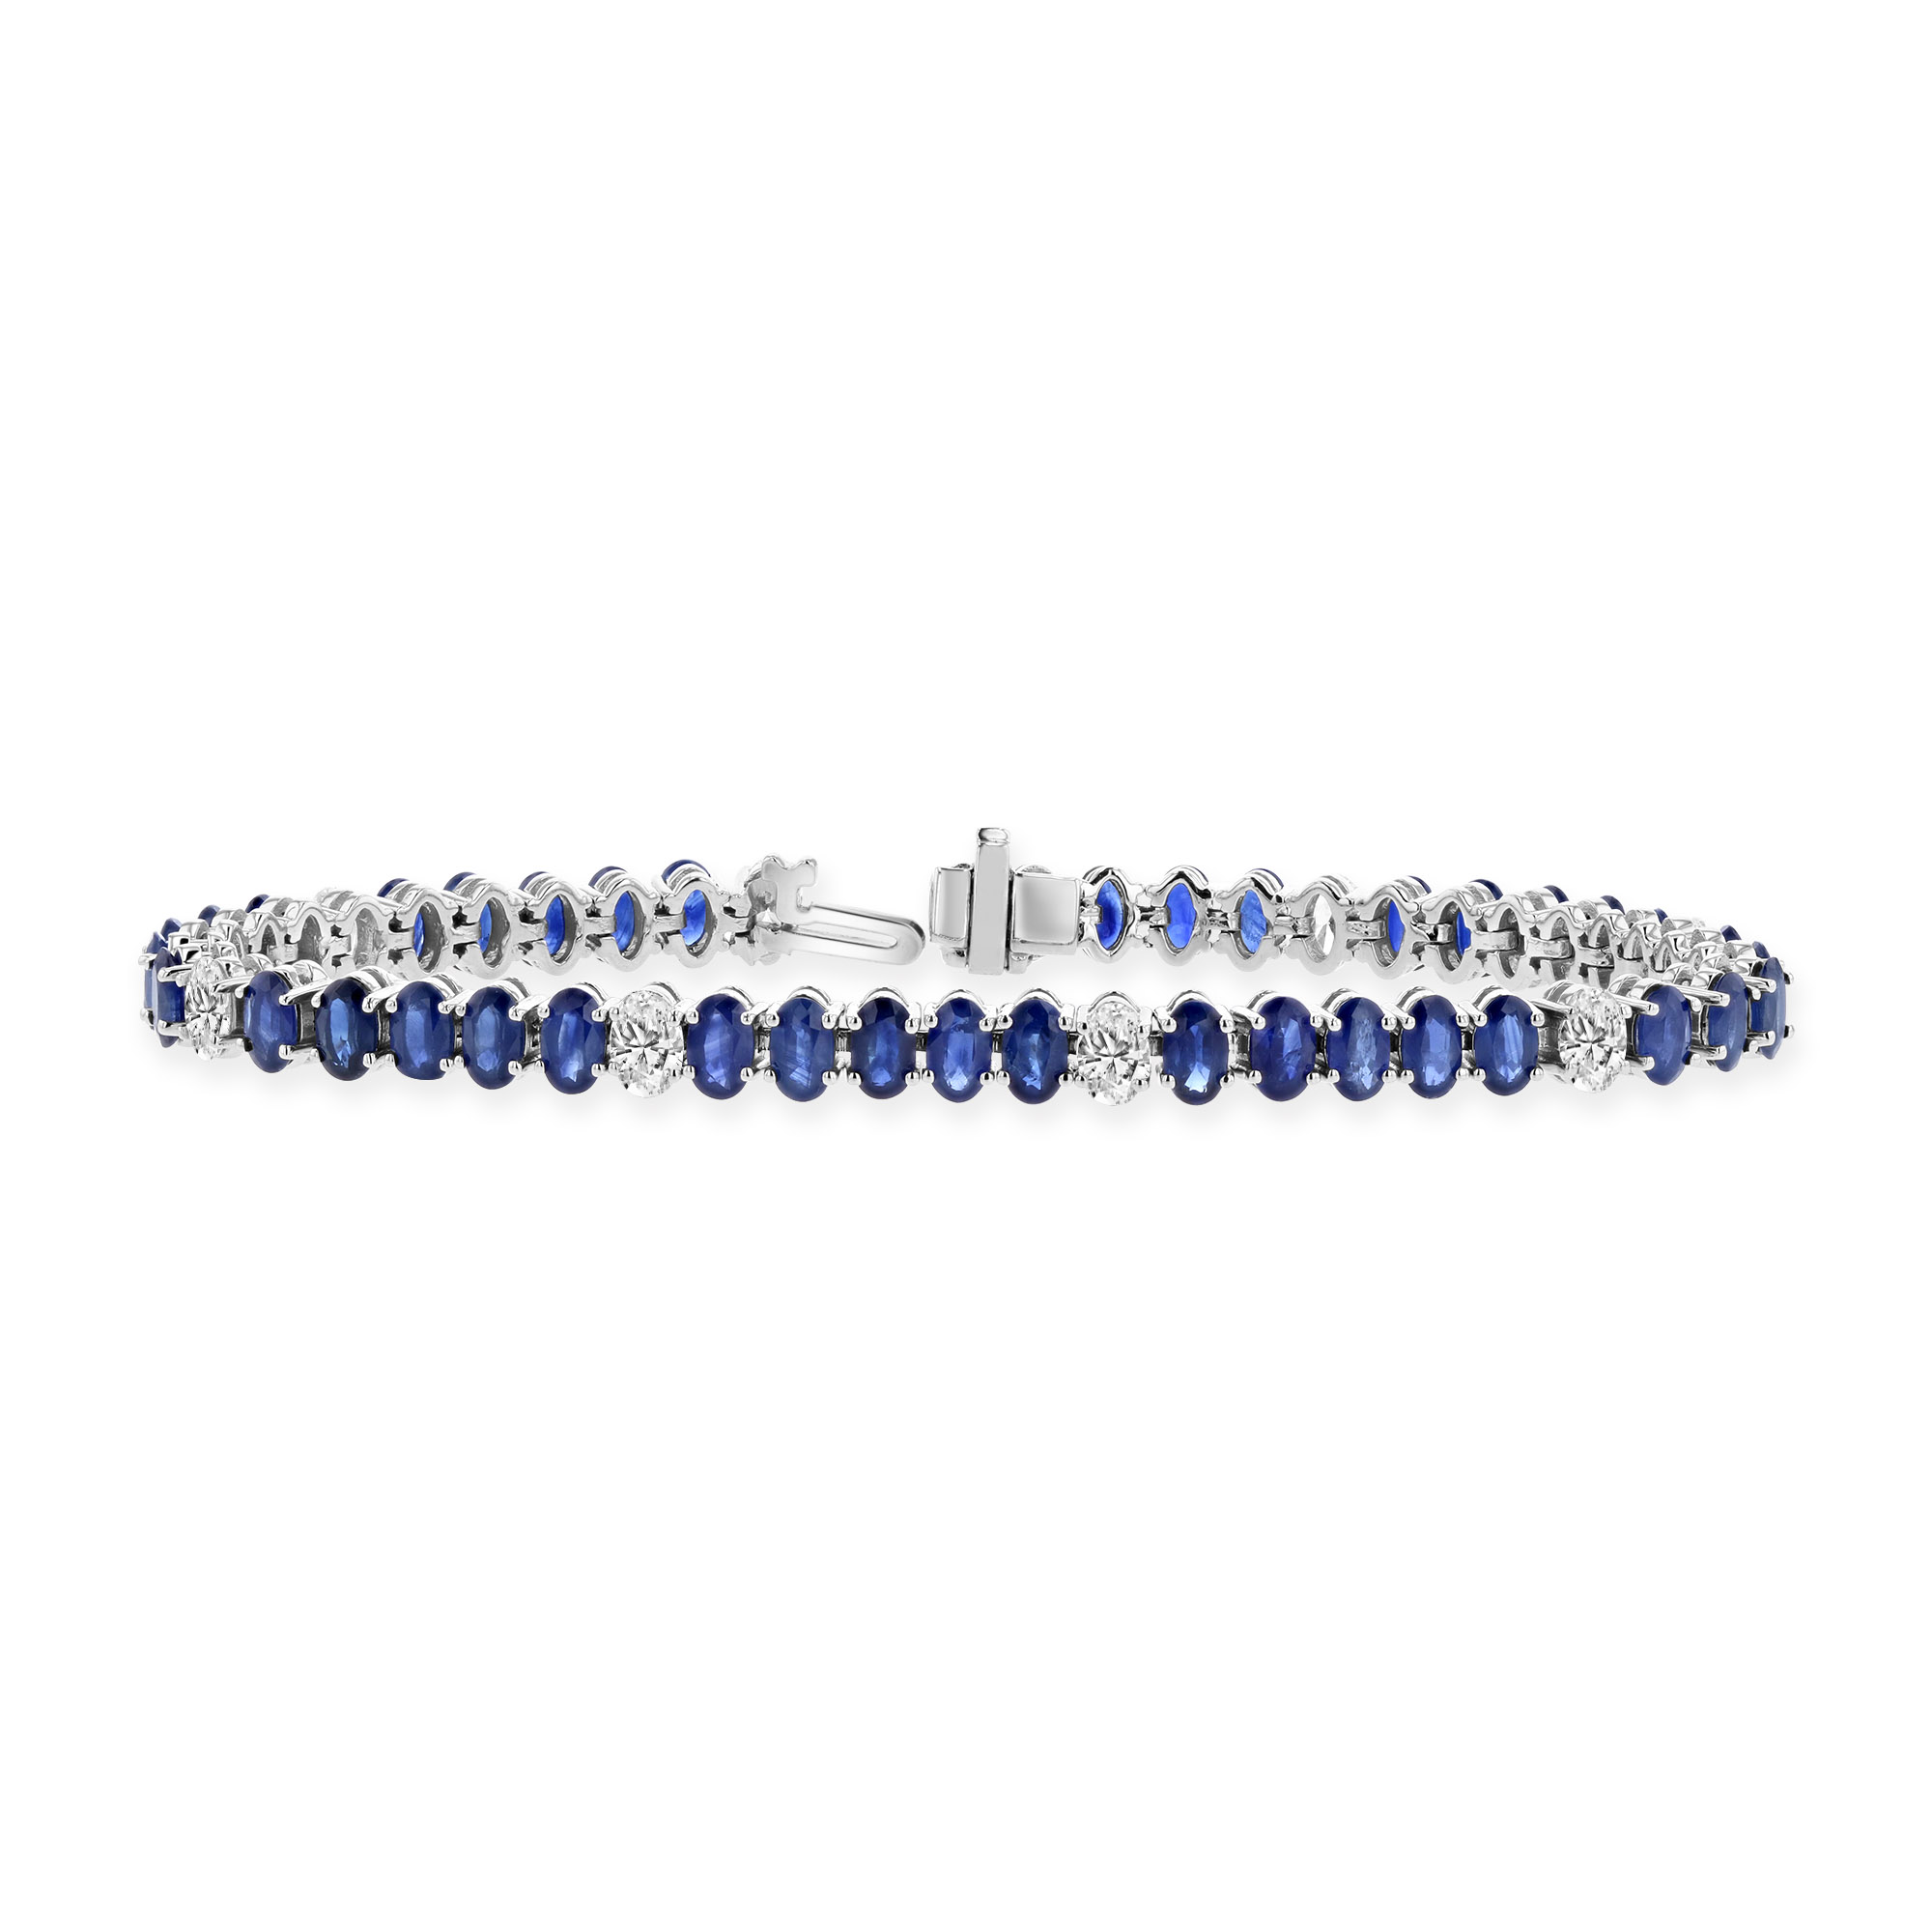 View 2.06ctw Oval Diamonds and Sapphire Bracelet in 14k White Gold